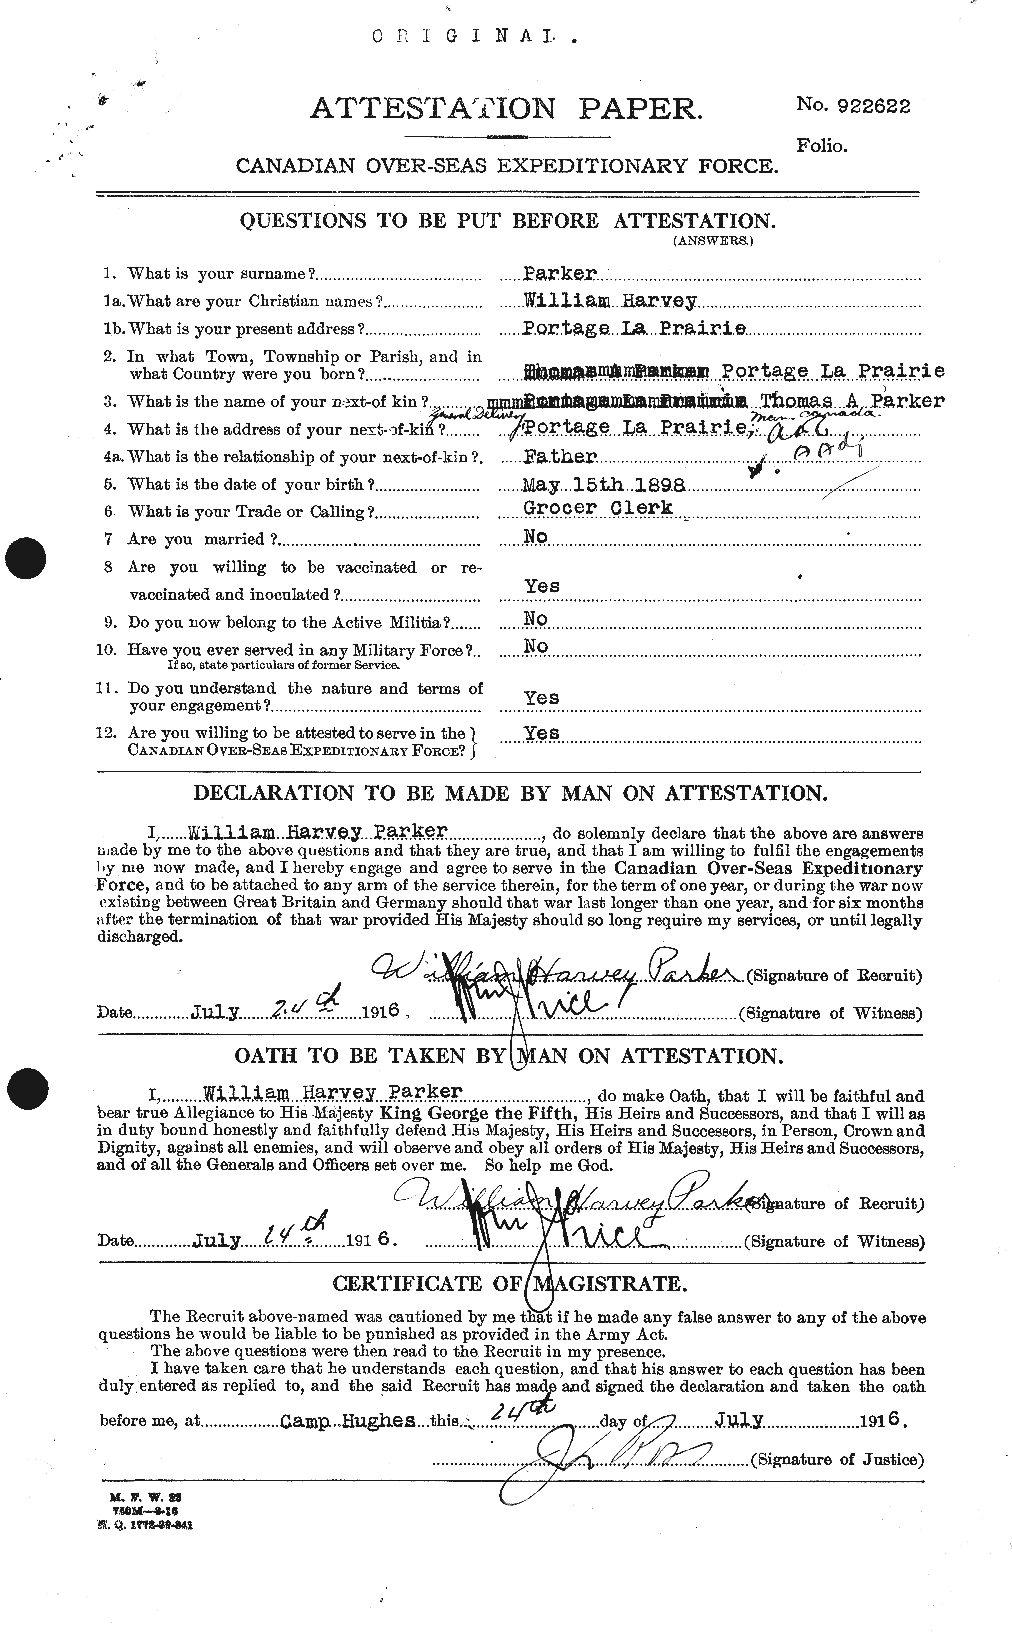 Personnel Records of the First World War - CEF 565748a